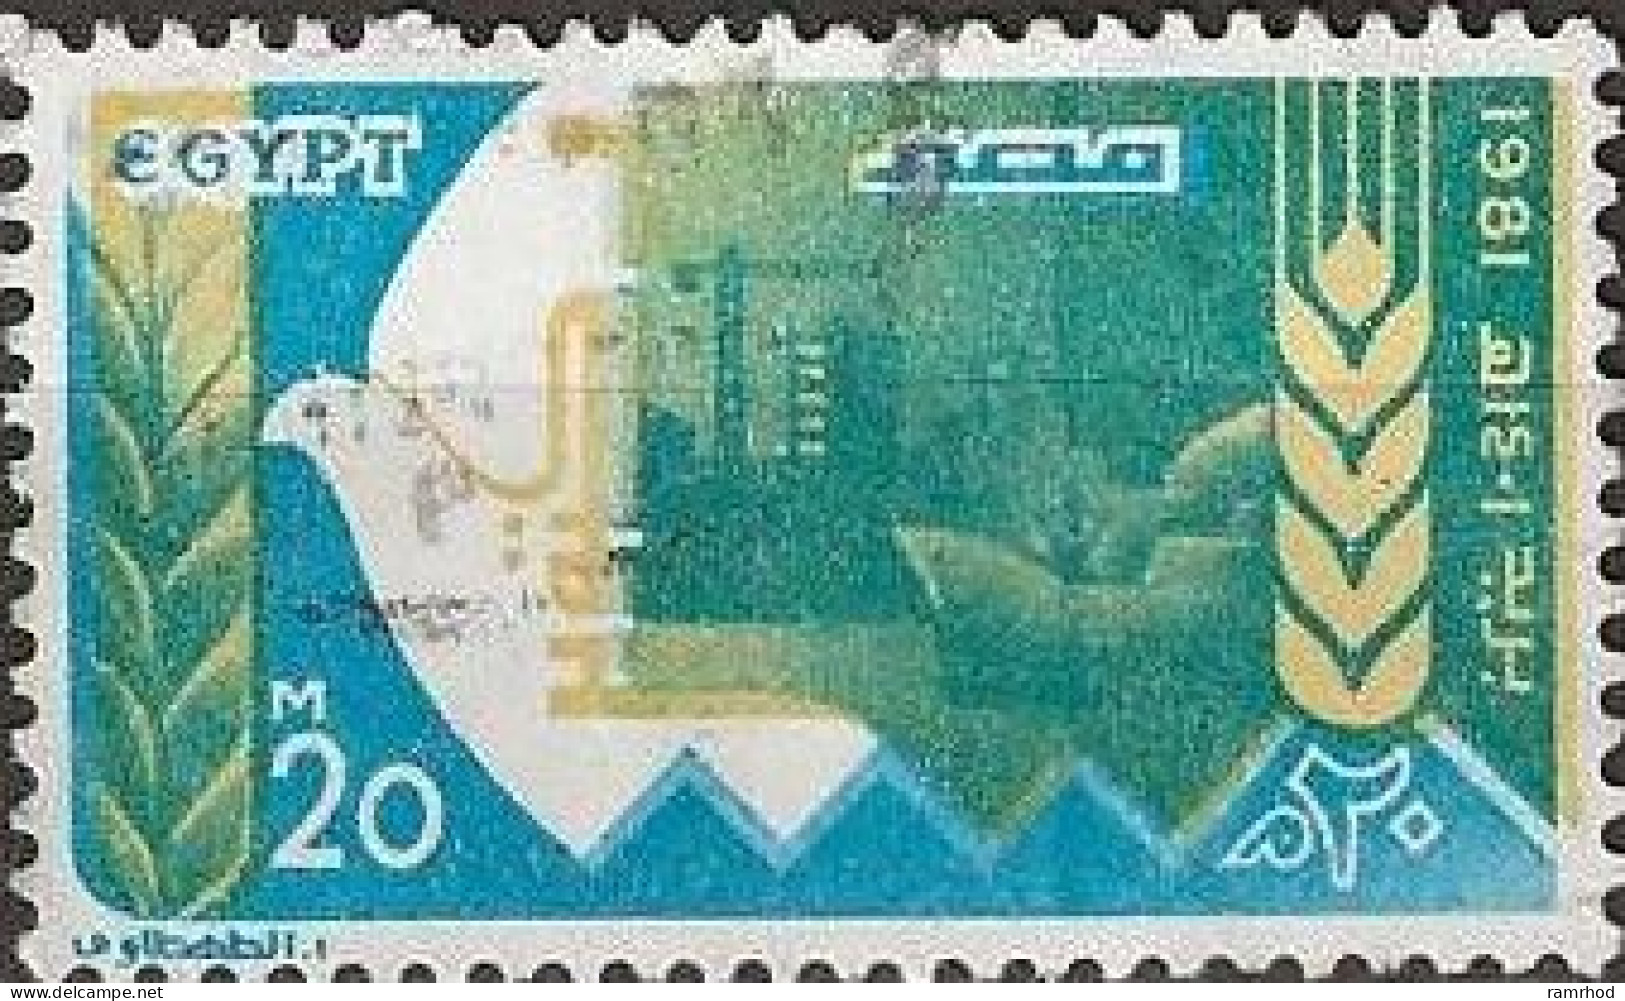 EGYPT 1981 Eighth Anniversary Of Suez Crossing - 20m - Olive, Dove, Canal And Wheat FU - Oblitérés